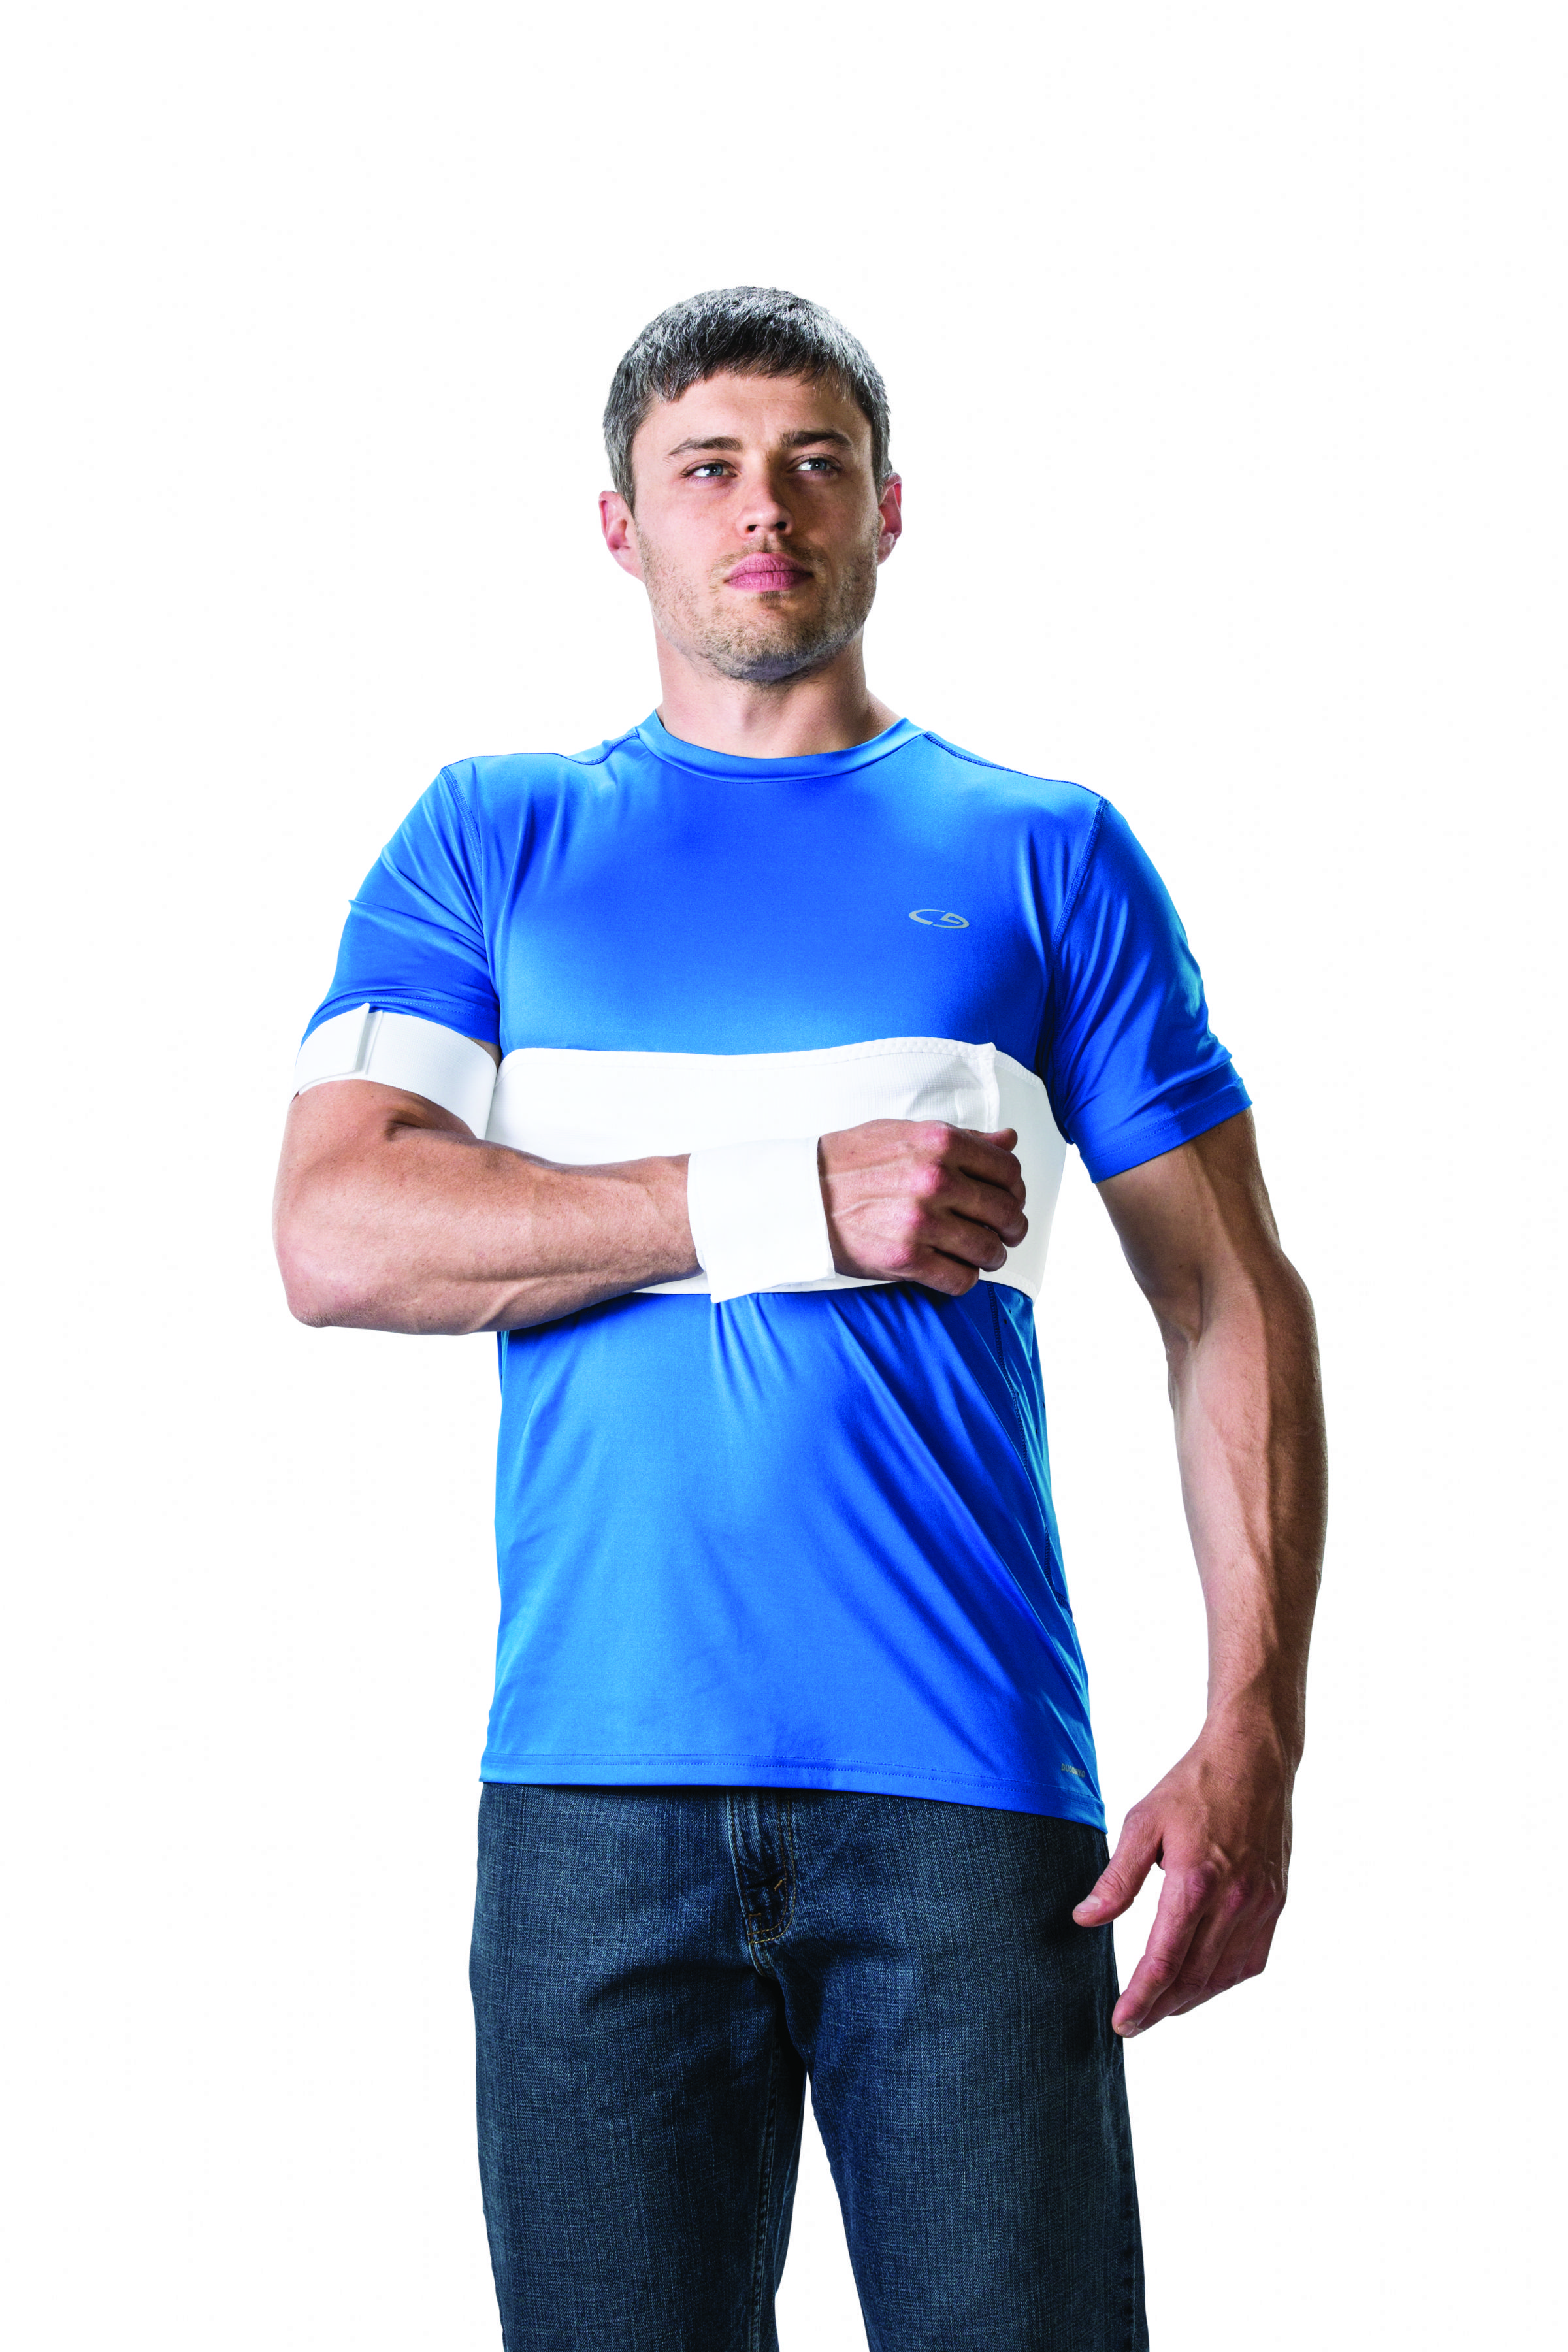 Shoulder Immobilizer Supports DISCOUNT SALE - FREE Shipping